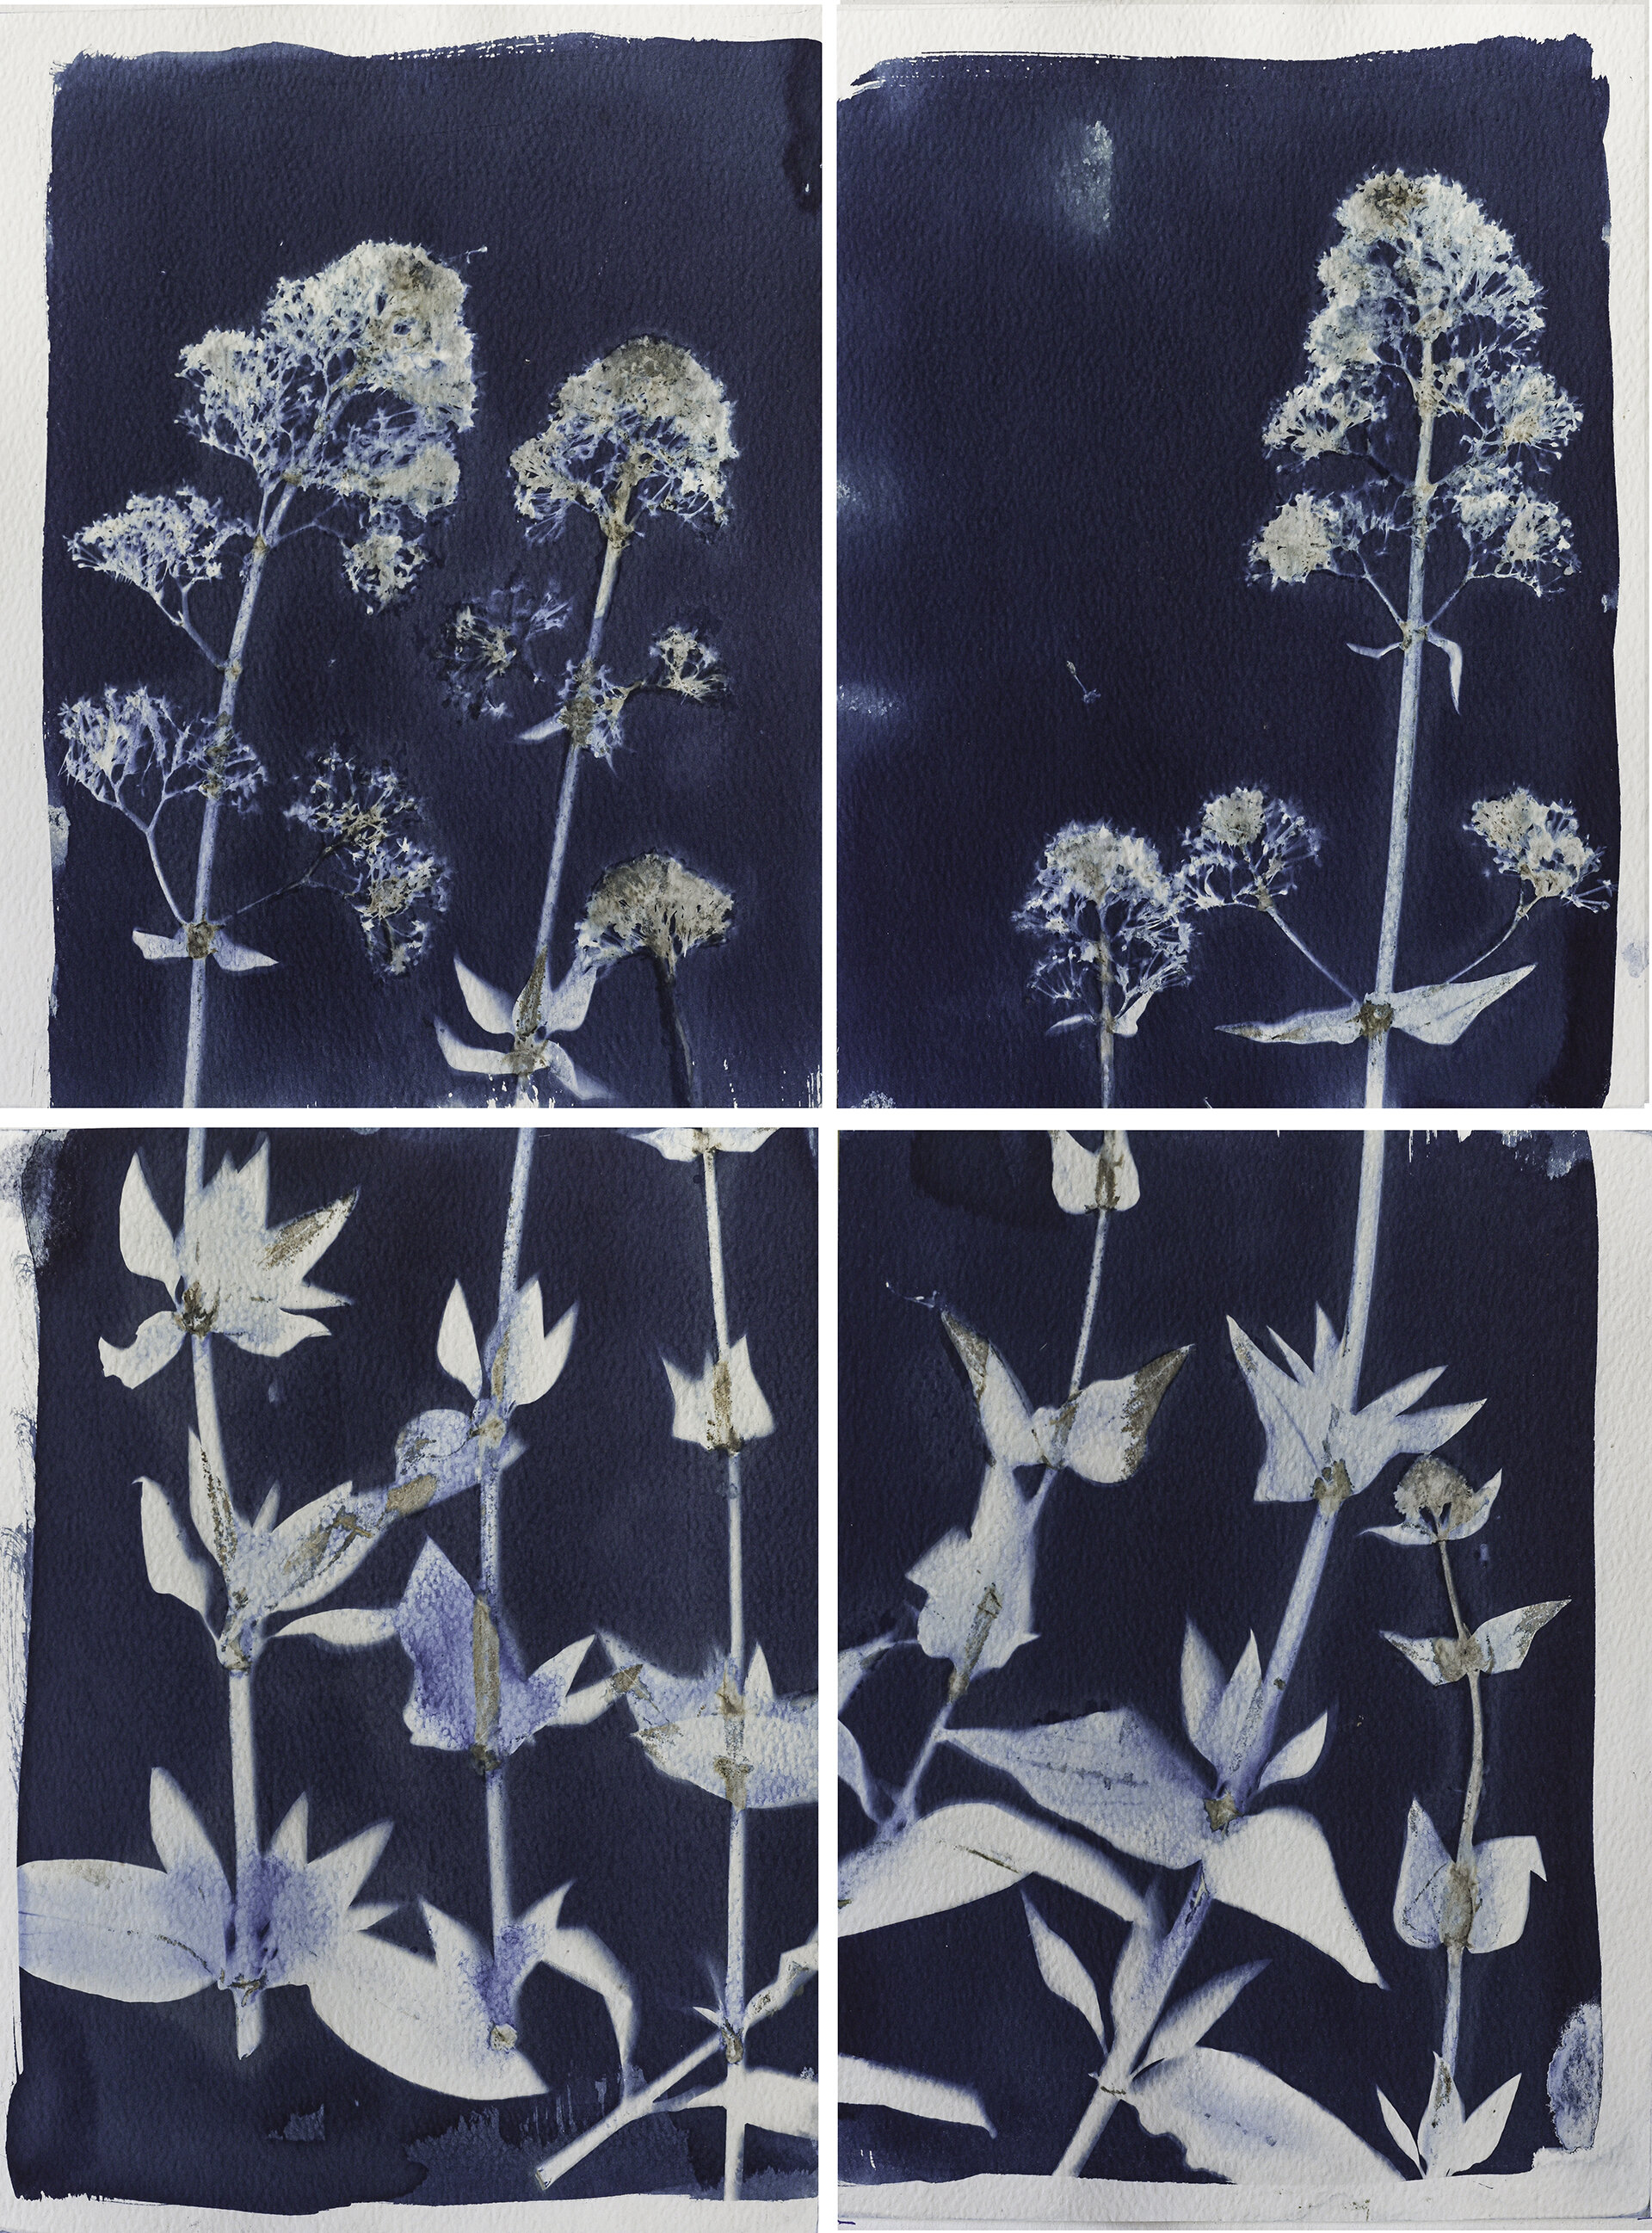  What happen to lost love? The love that went unspoken, the unrequited love, the broken love?   I like to imagine that it roams the universe in search of a home, and find it in a magical garden where it can finally rest and bloom.  Cyanotype prints o